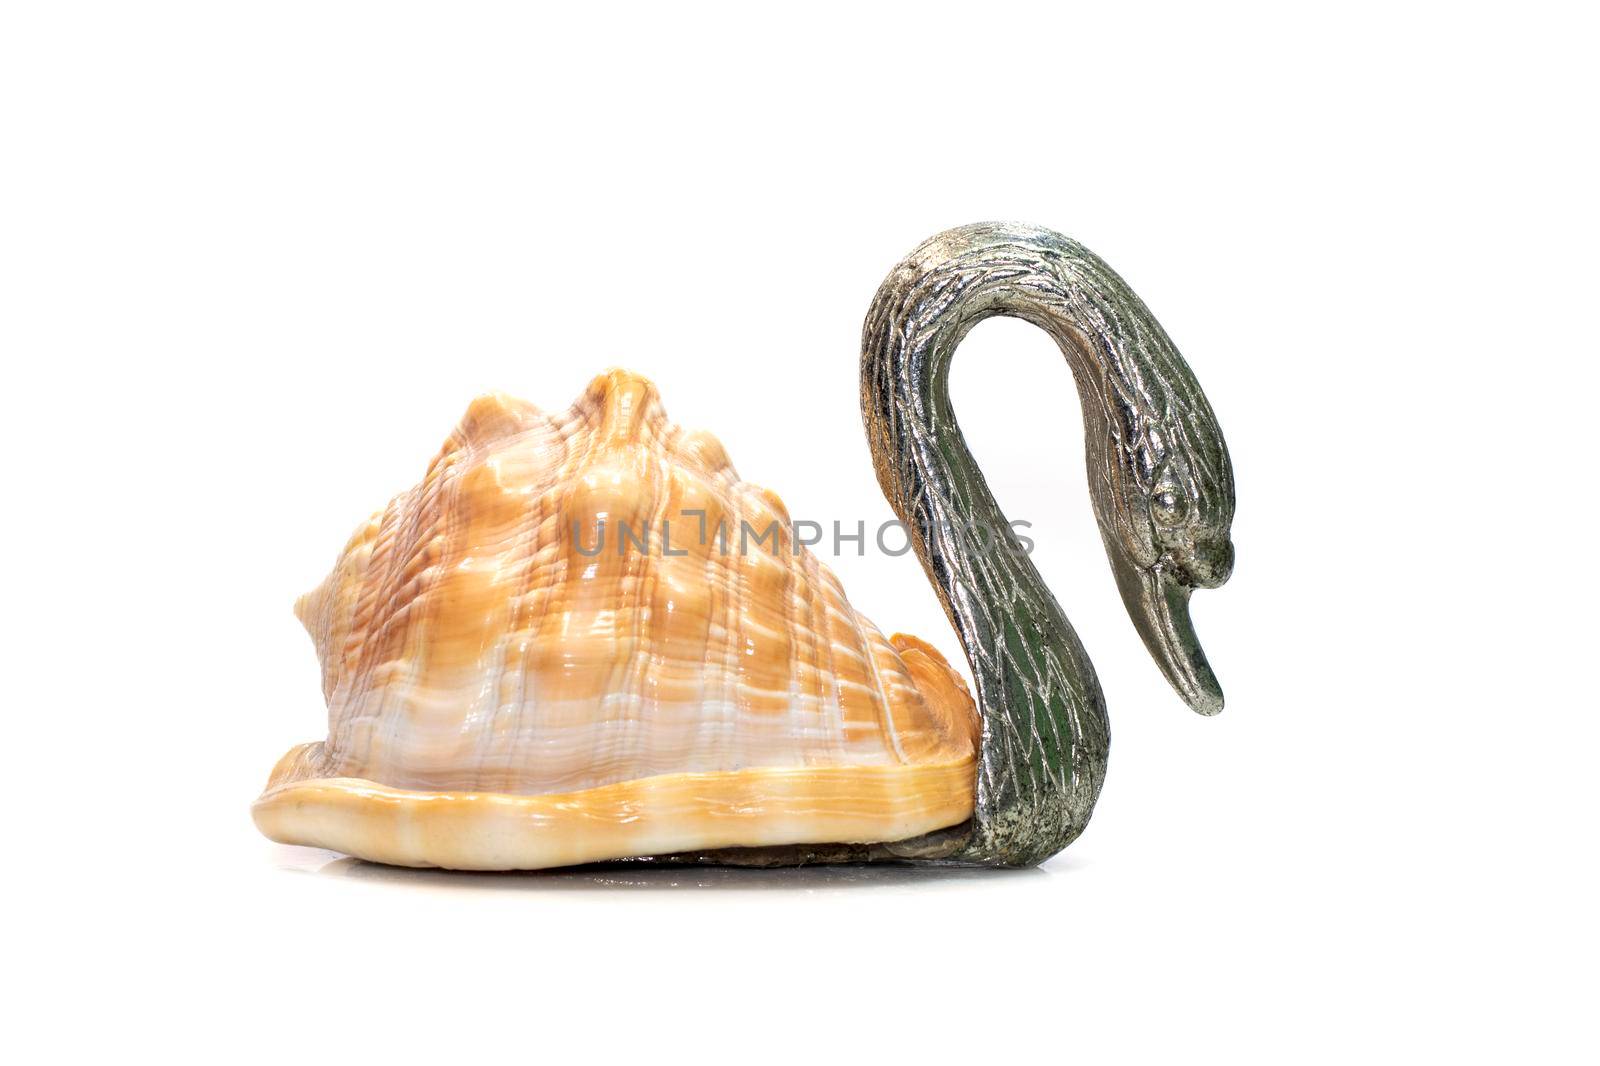 Image of swan sculpture with shells as part of its body. isolated on white background. Home decoration by yod67